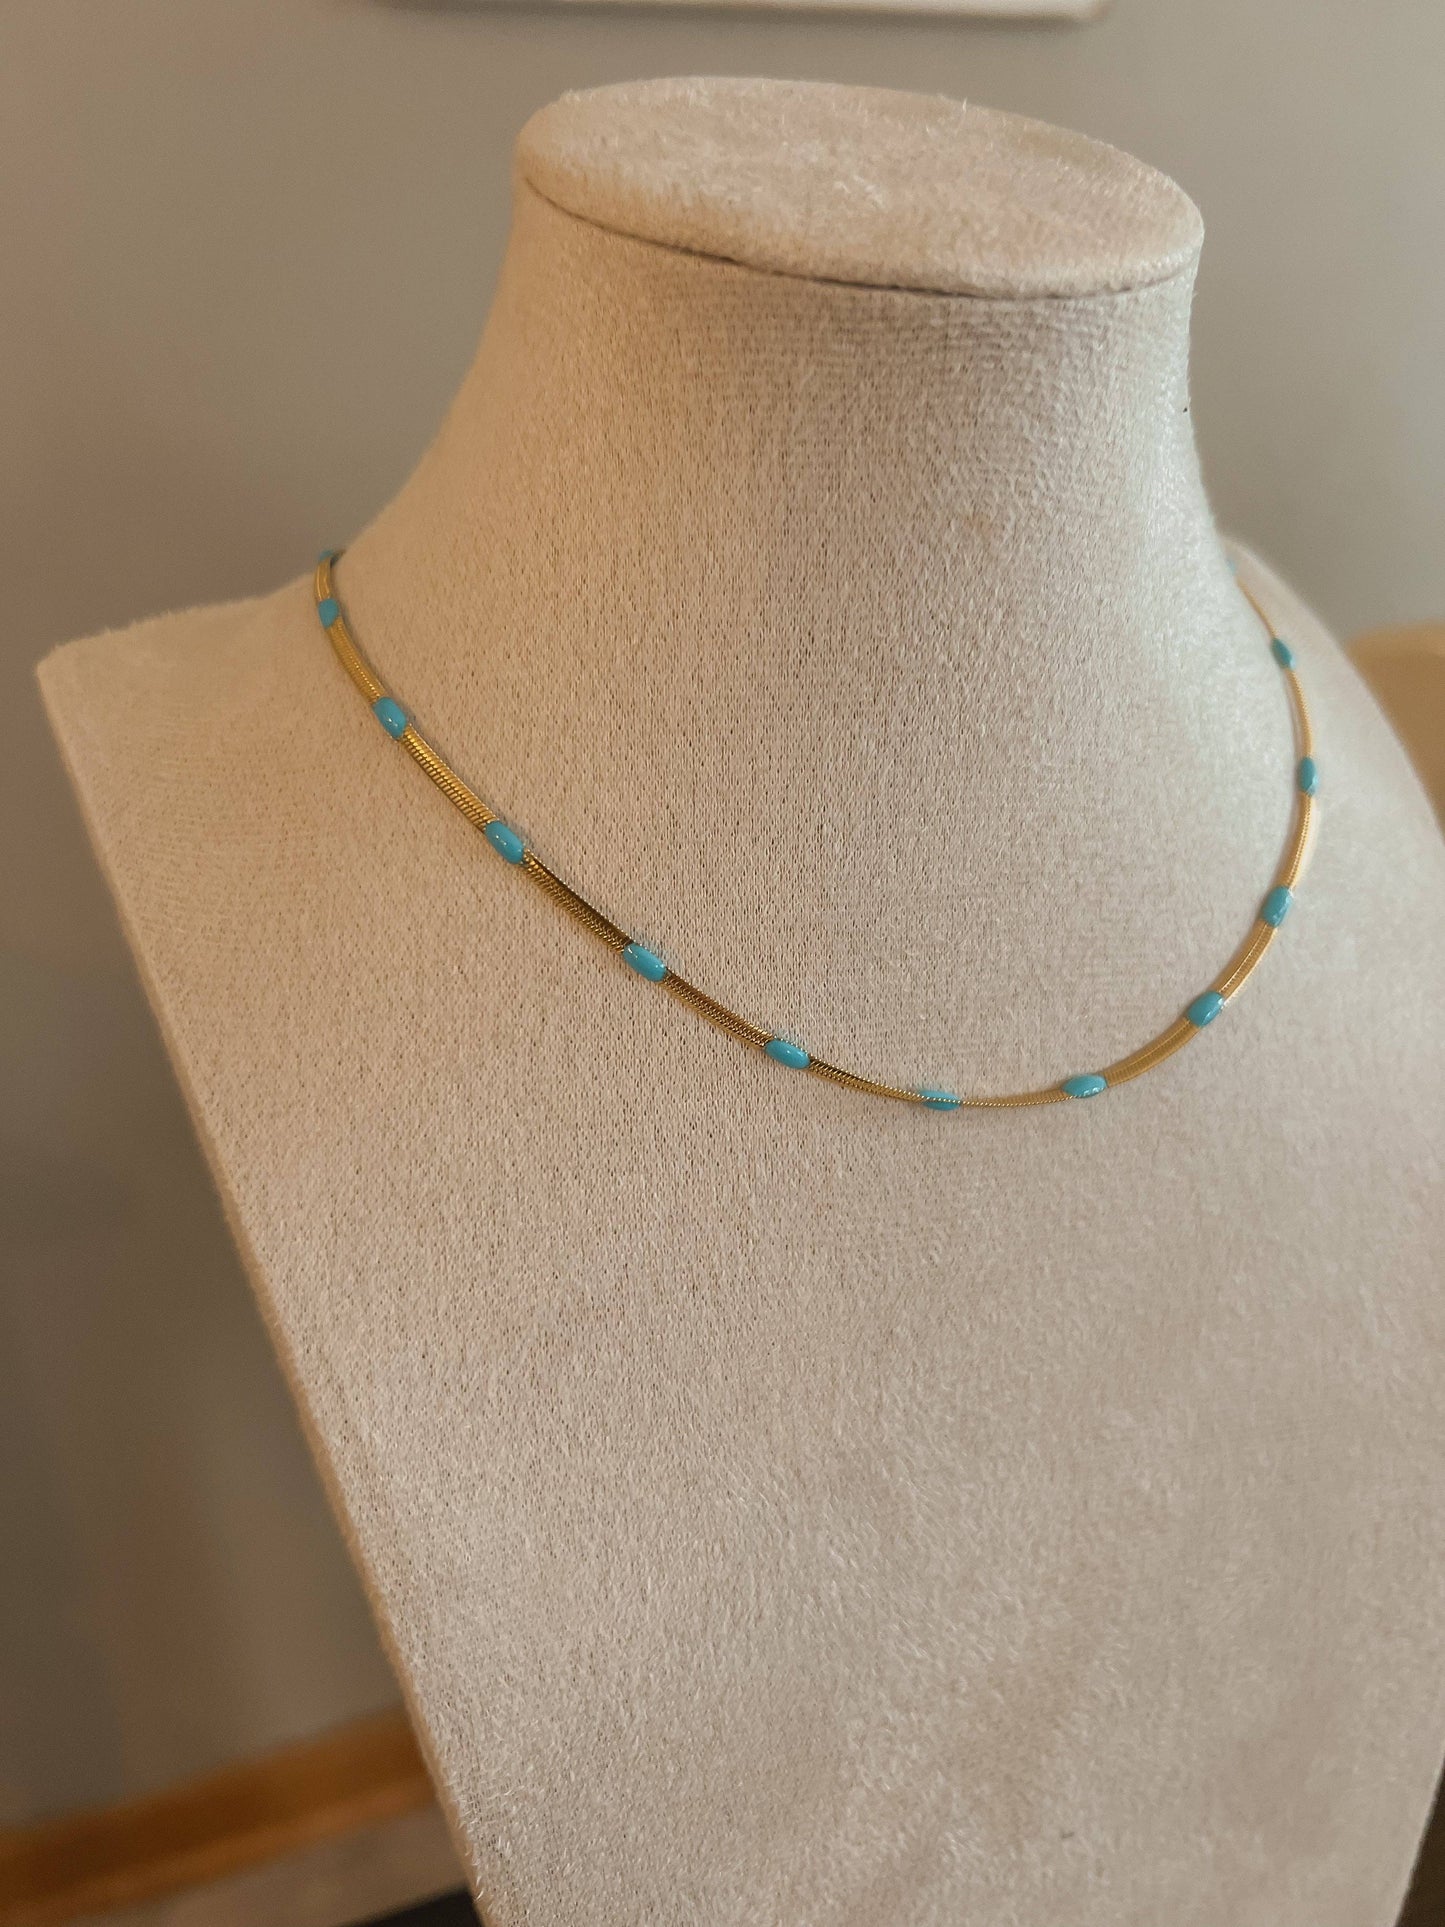 Turquoise Snake Necklace